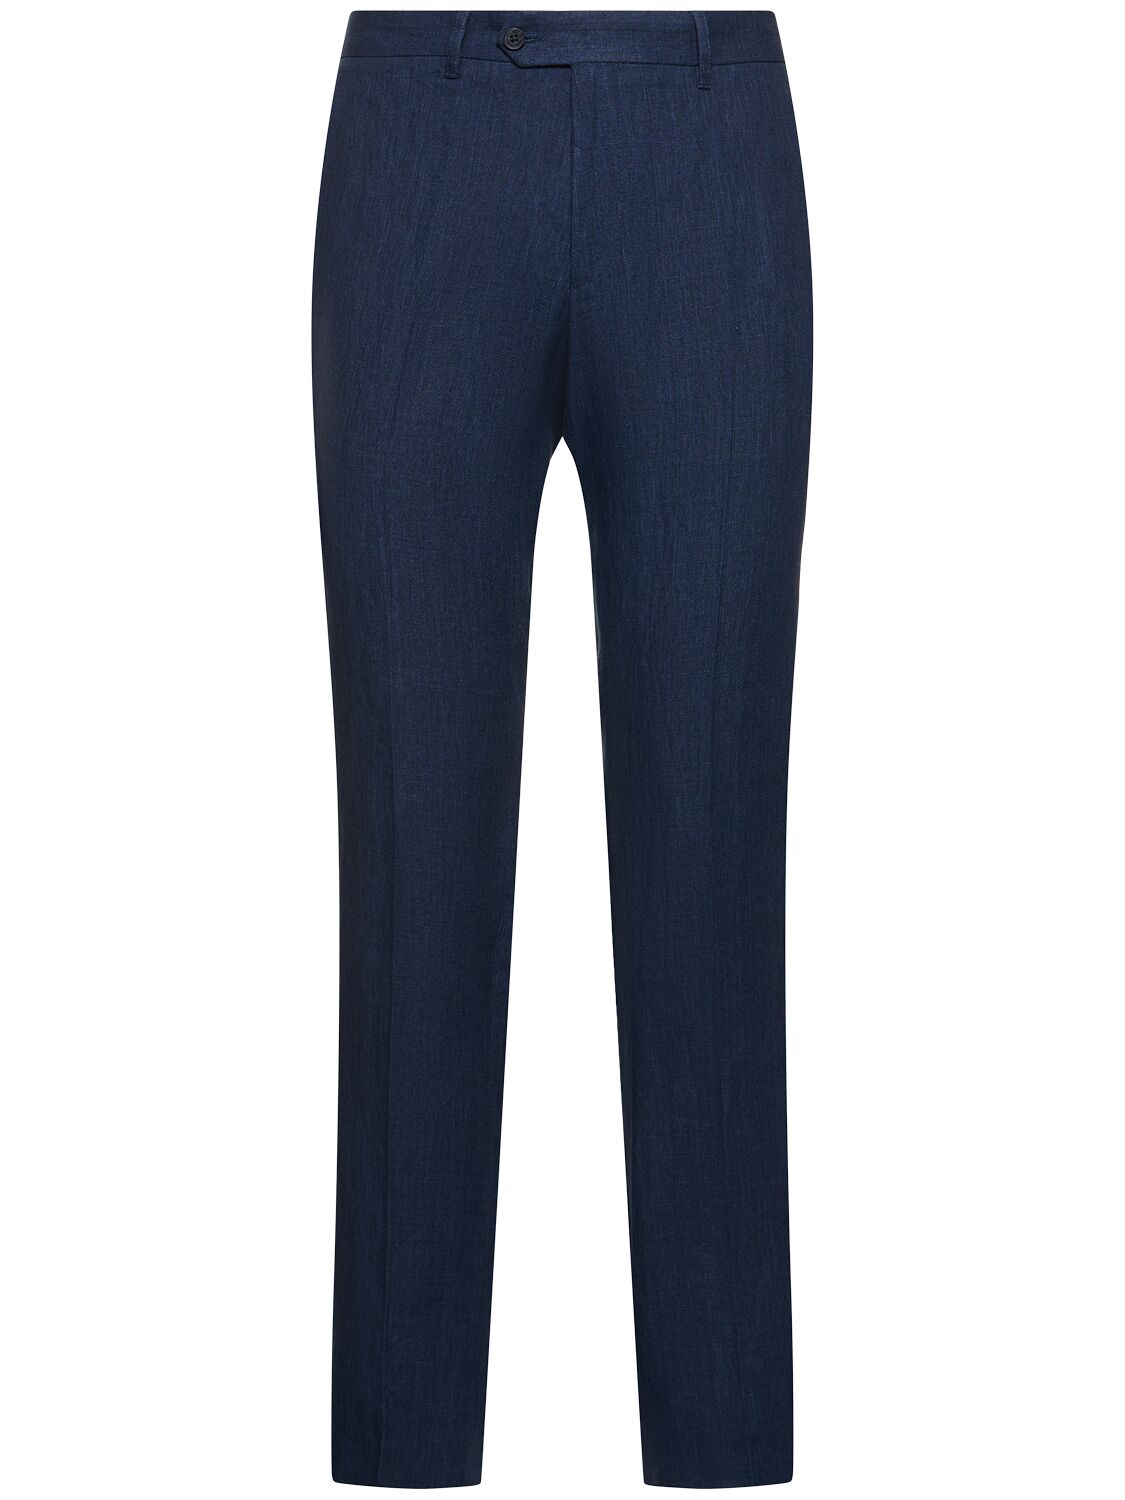 Frescobol Carioca Affonso Tailored Linen Pants In Navy